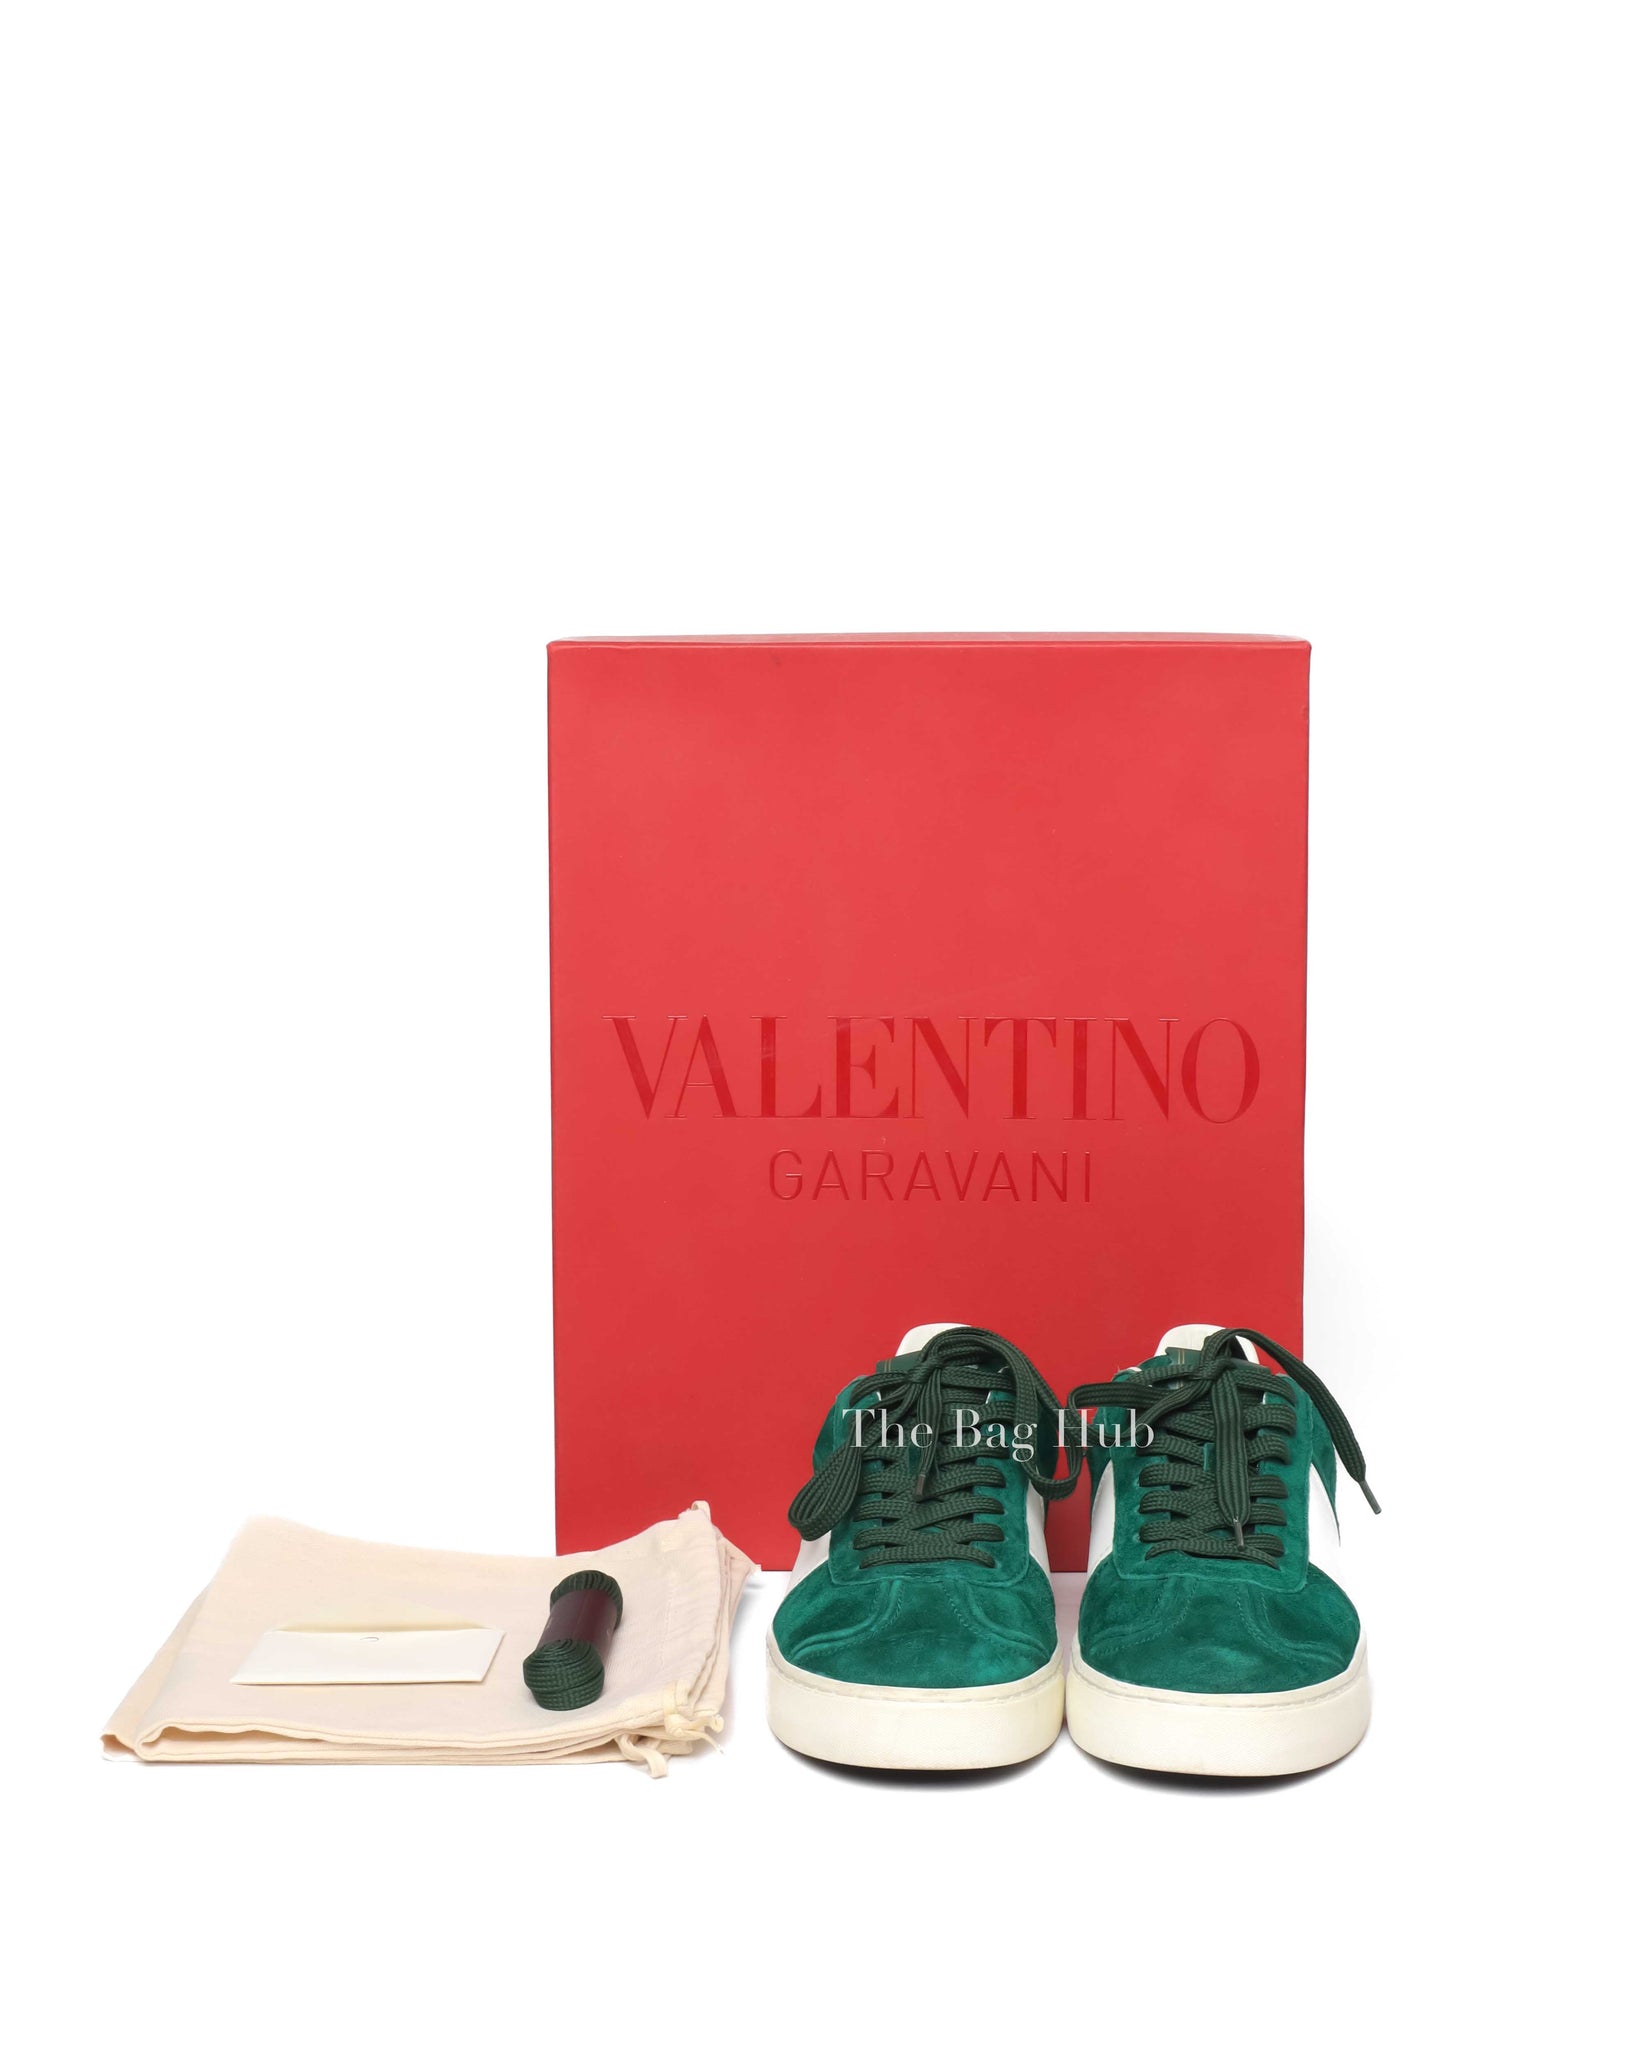 Valentino Garavani White/Green Suede and Leather Flycrew Sneakers Size 40-9